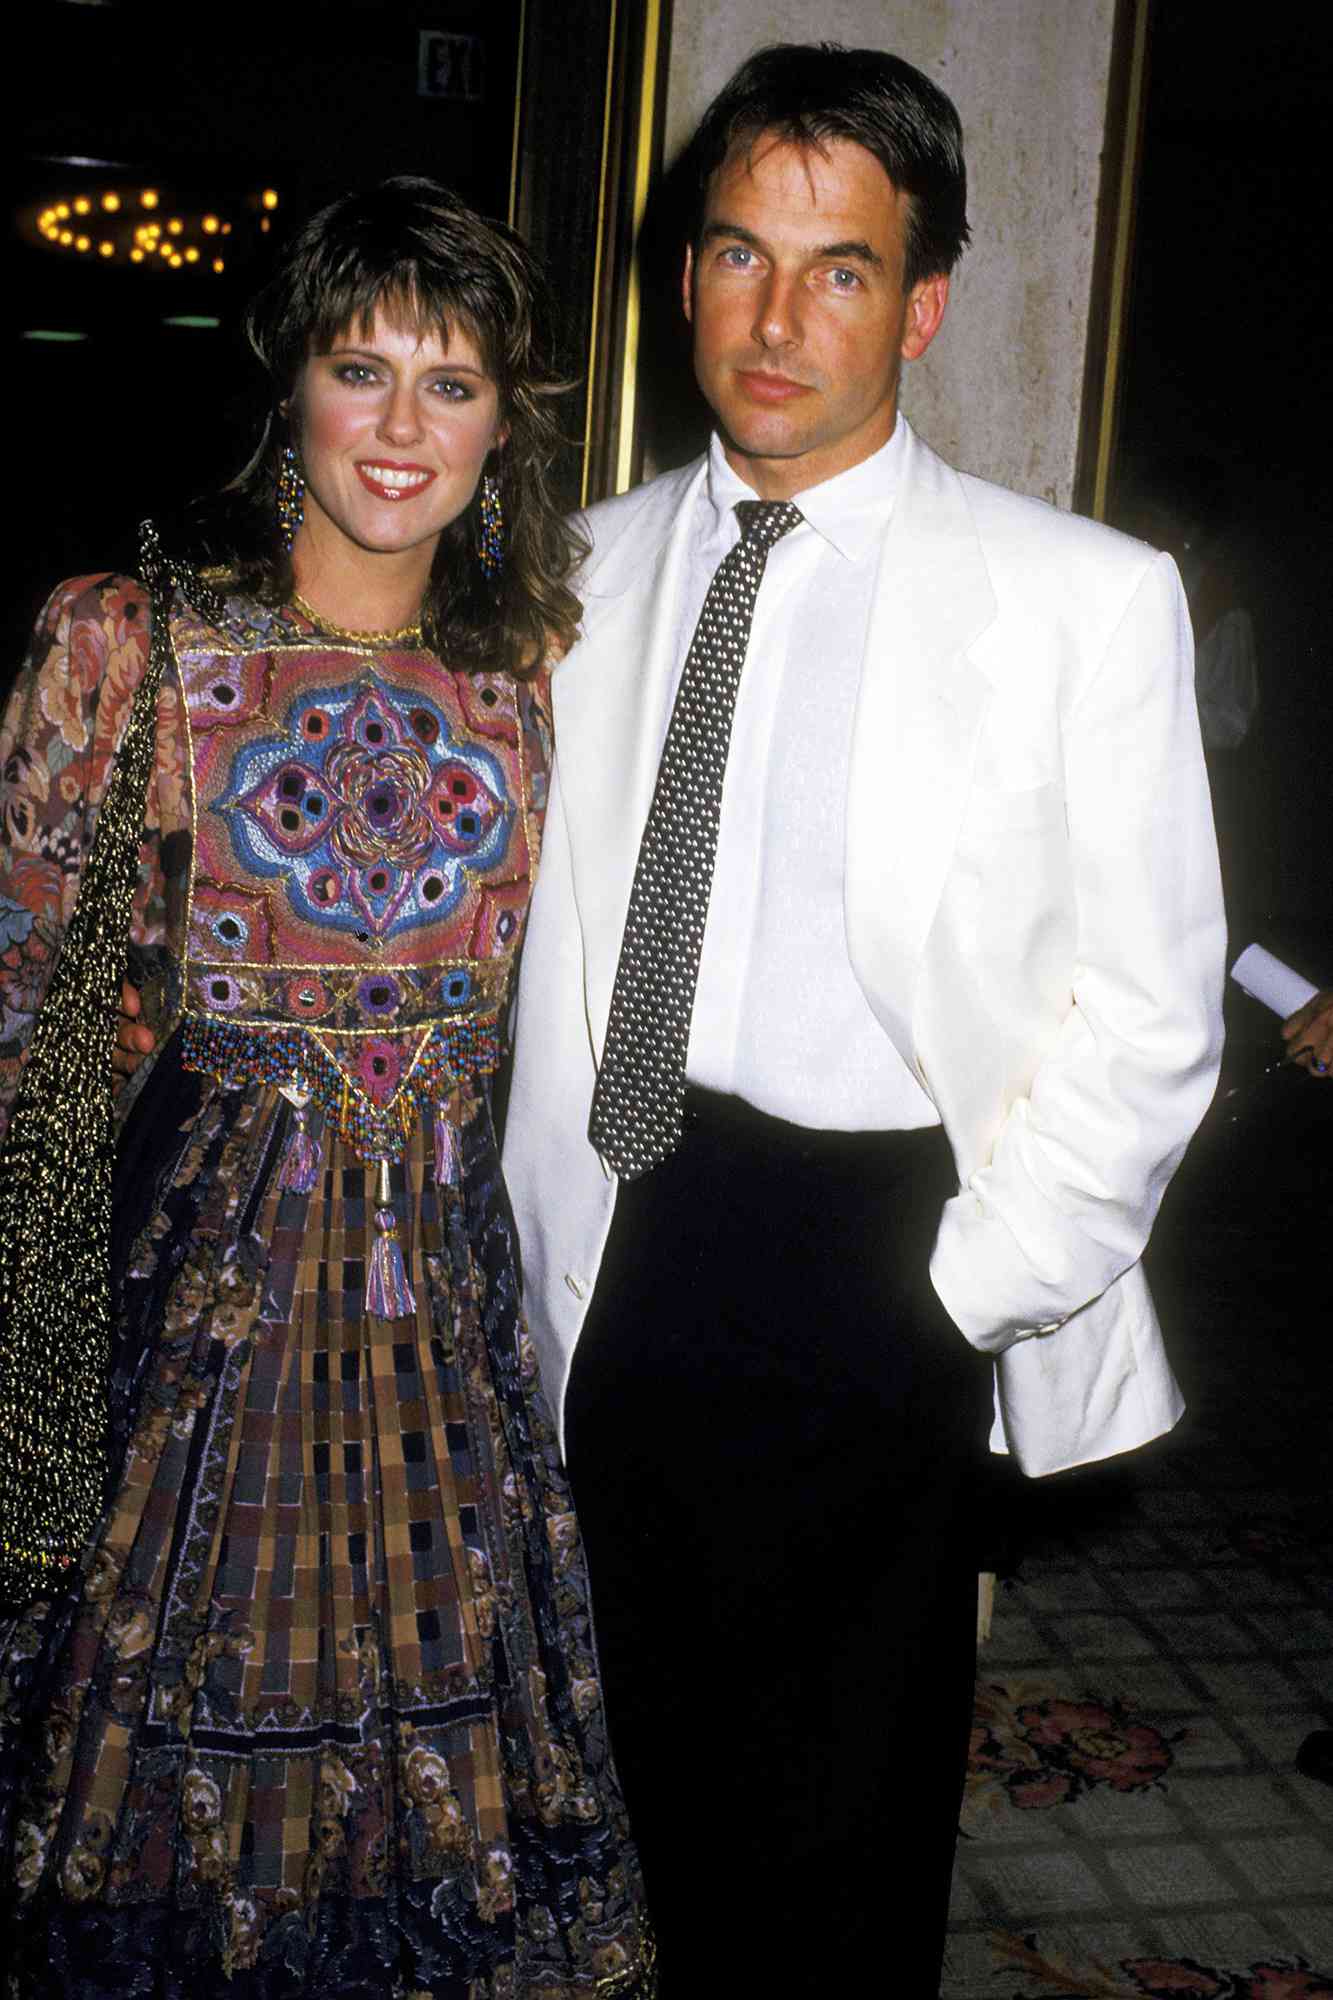 Pam Dawber and Mark Harmon during Premiere of "Dr. Dolittle" in New York City, New York, United States. (Photo by Ron Galella/Ron Galella Collection via Getty Images)